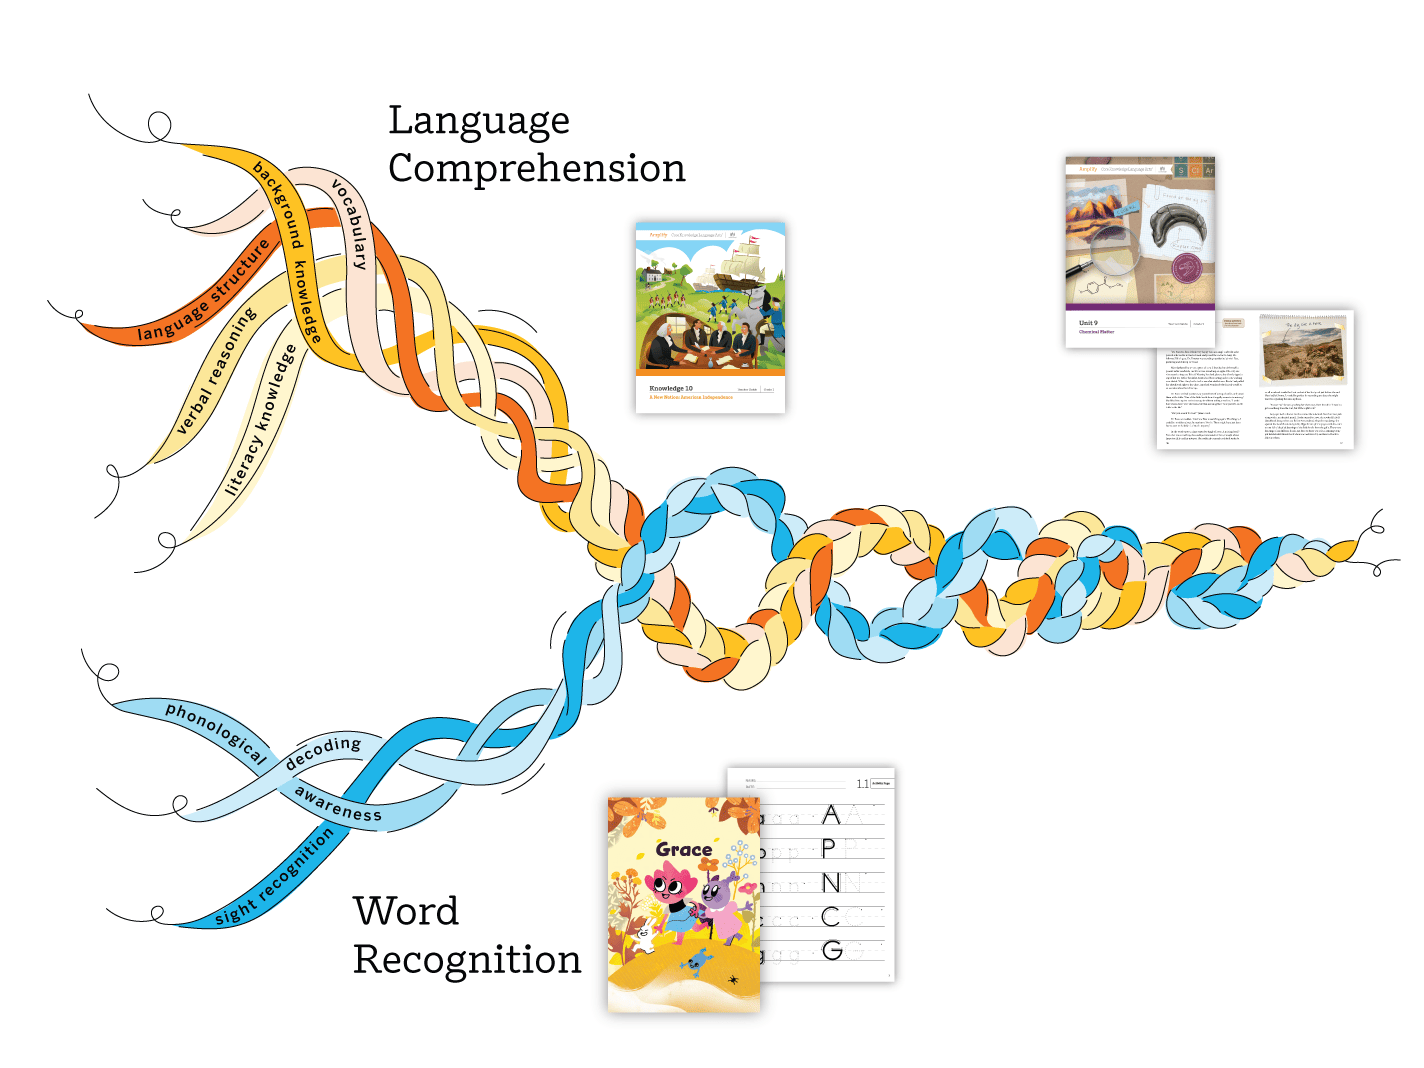 Reading rope showing knowledge-building and skill-development strands, and the merging of language comprehension and word recognition